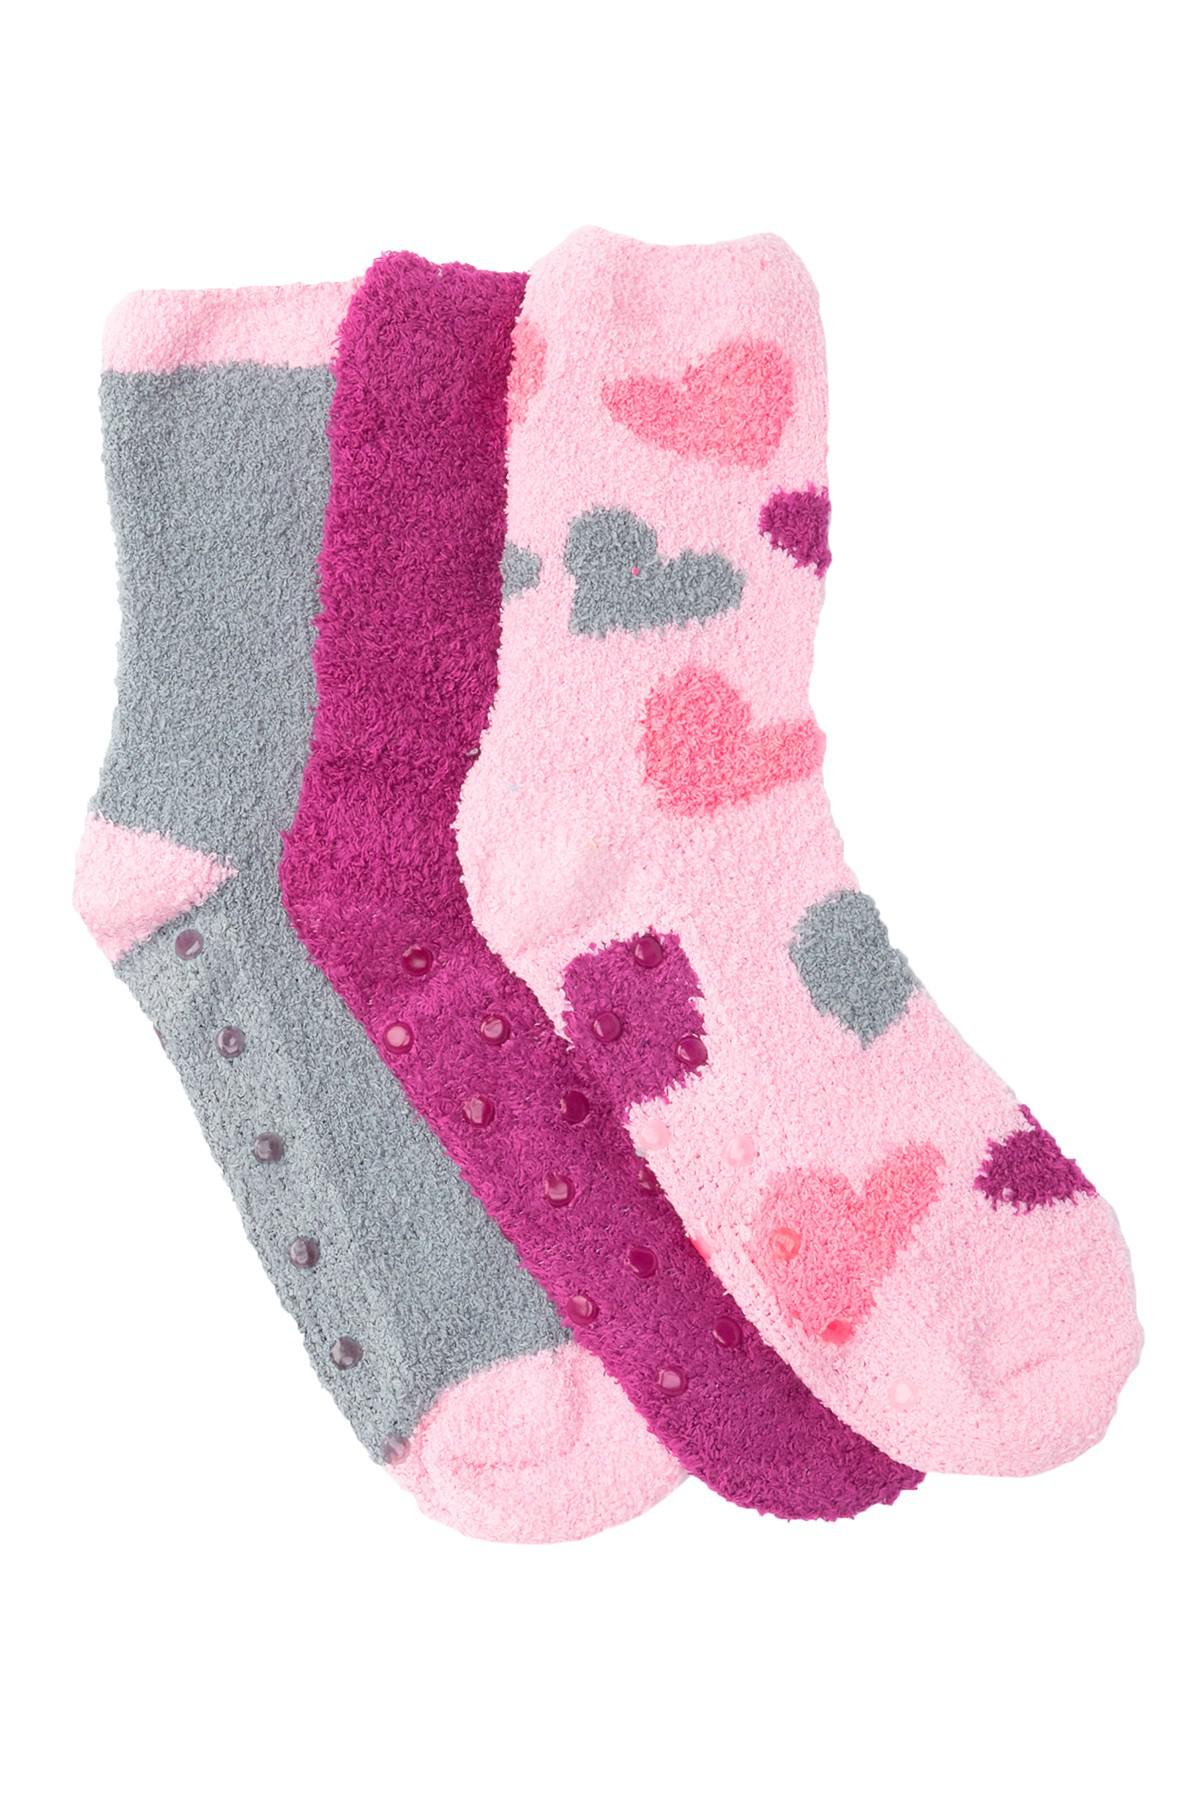 Lyst - Betsey Johnson Hearts Patterned Fuzzy Socks - Pack Of 3 in Pink